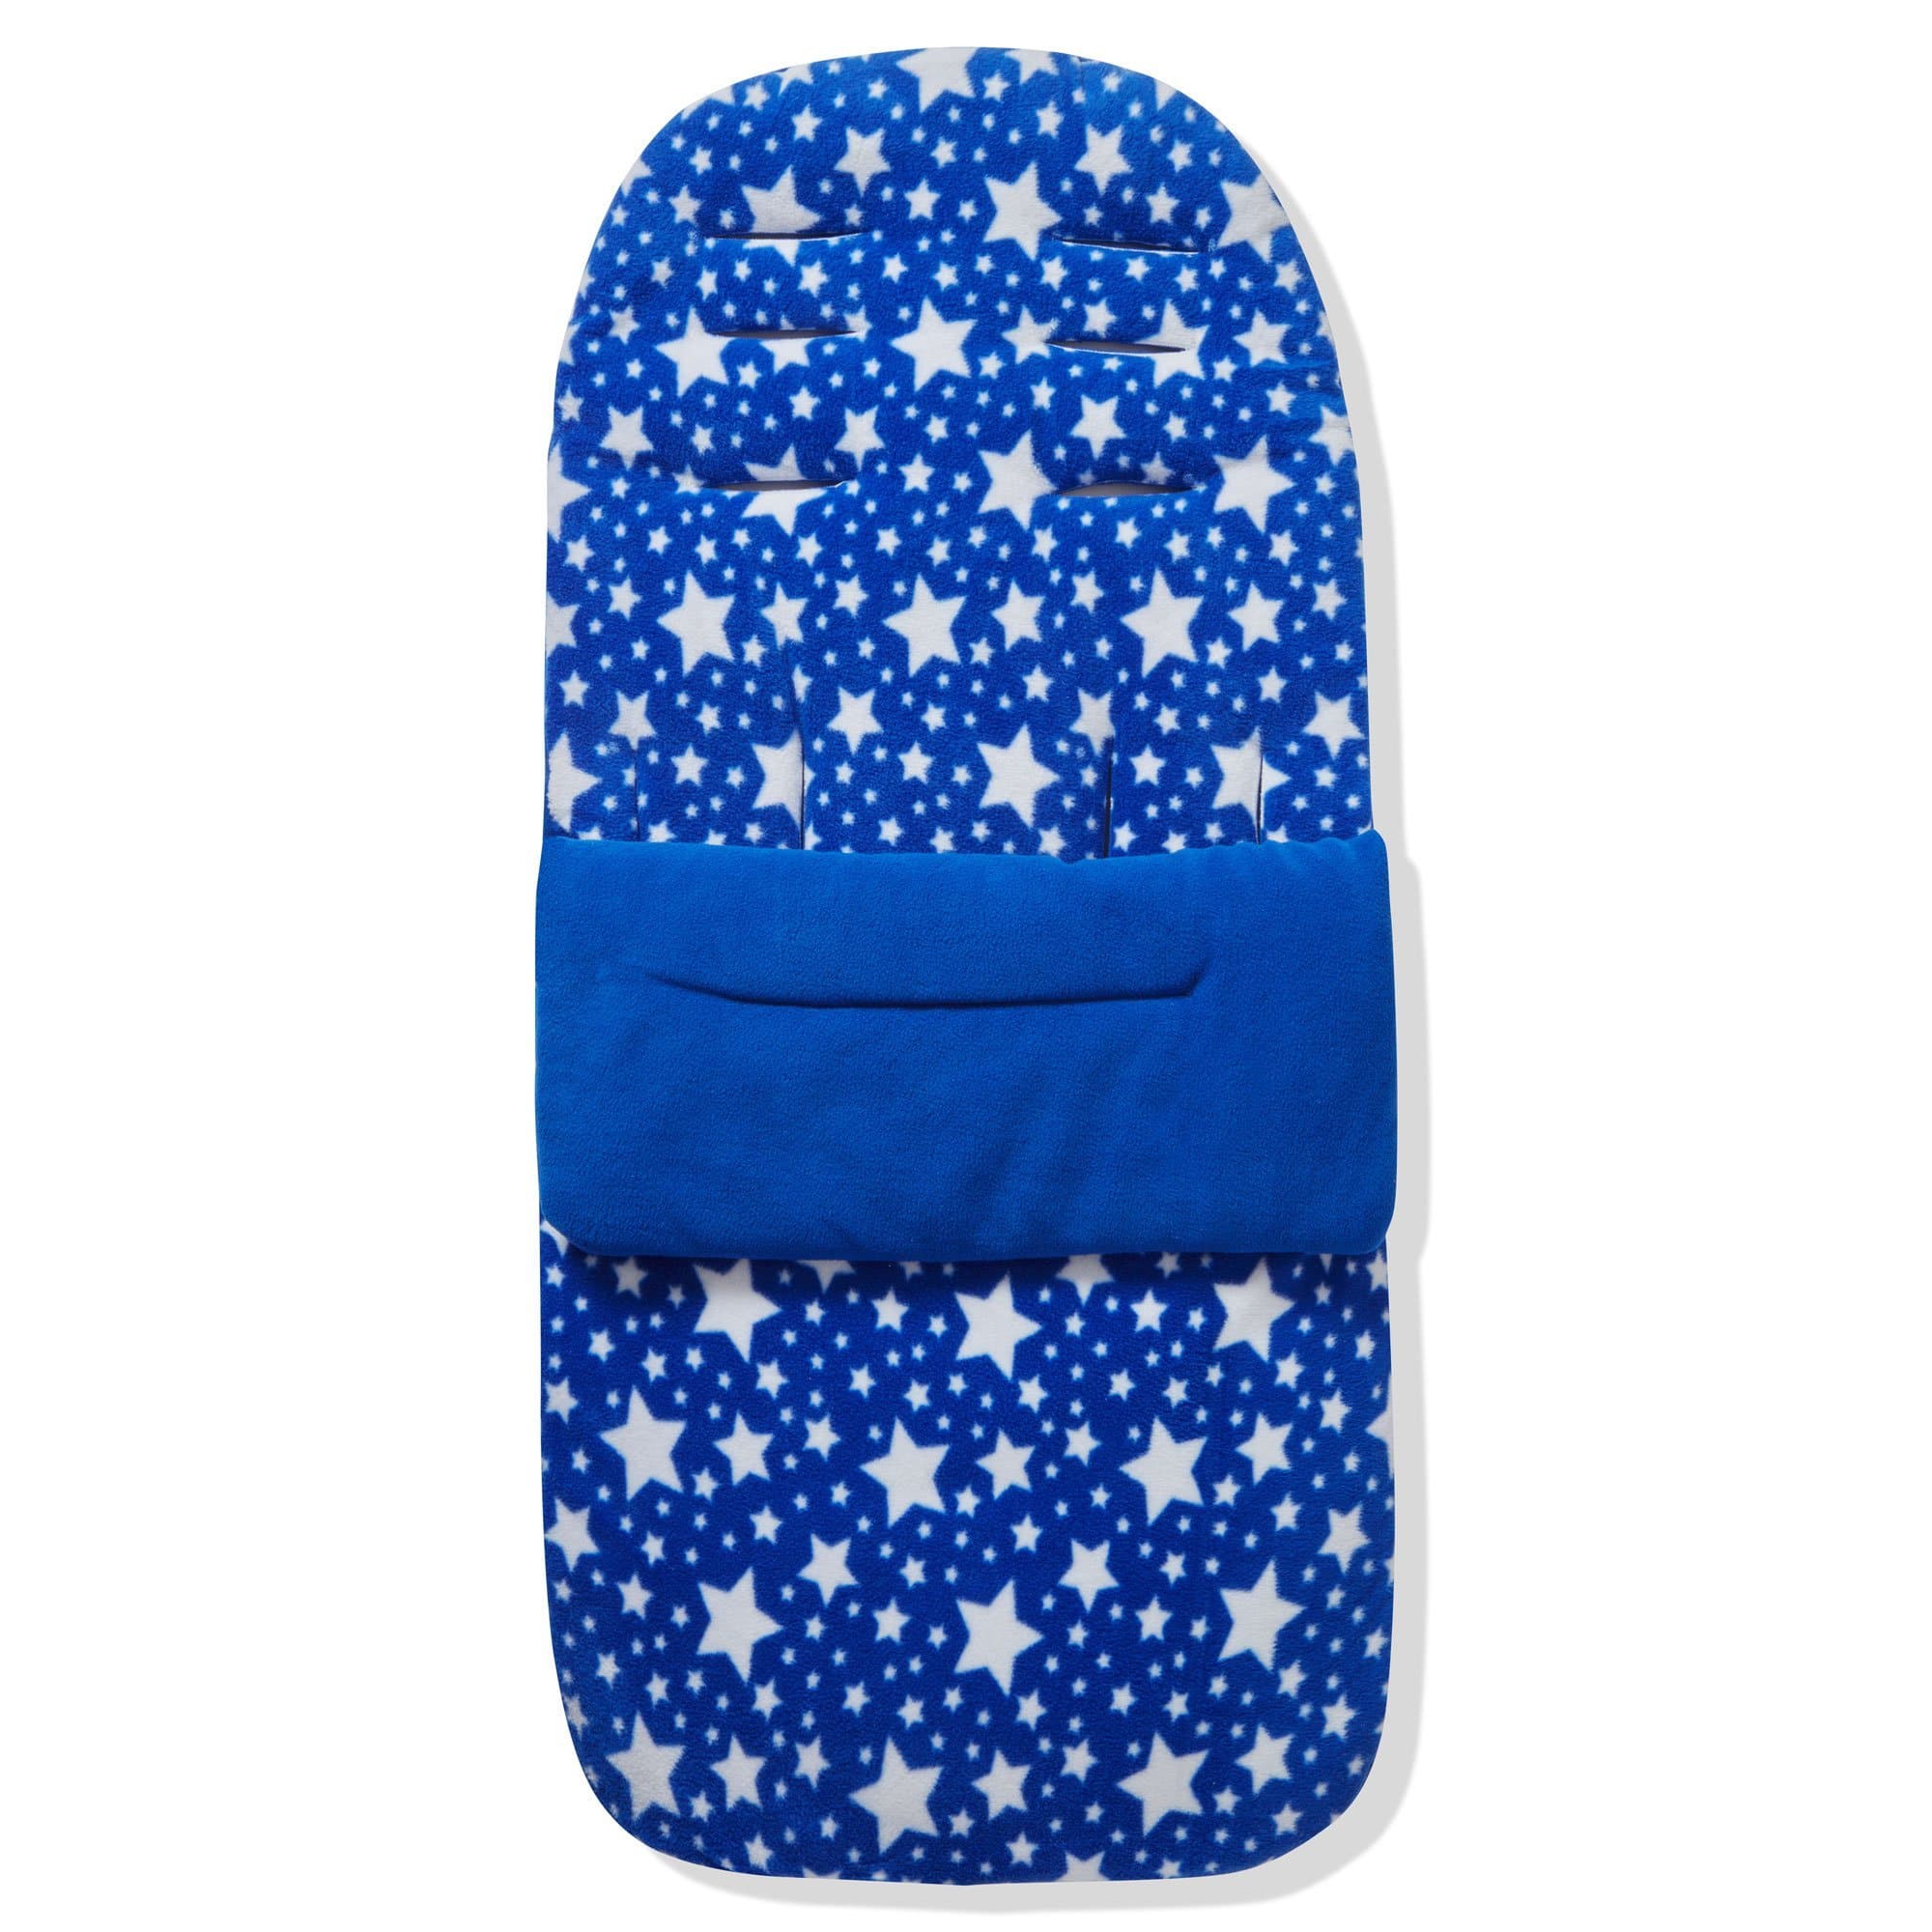 Fleece Footmuff / Cosy Toes Compatible With Britax - Blue Star / Fits All Models | For Your Little One